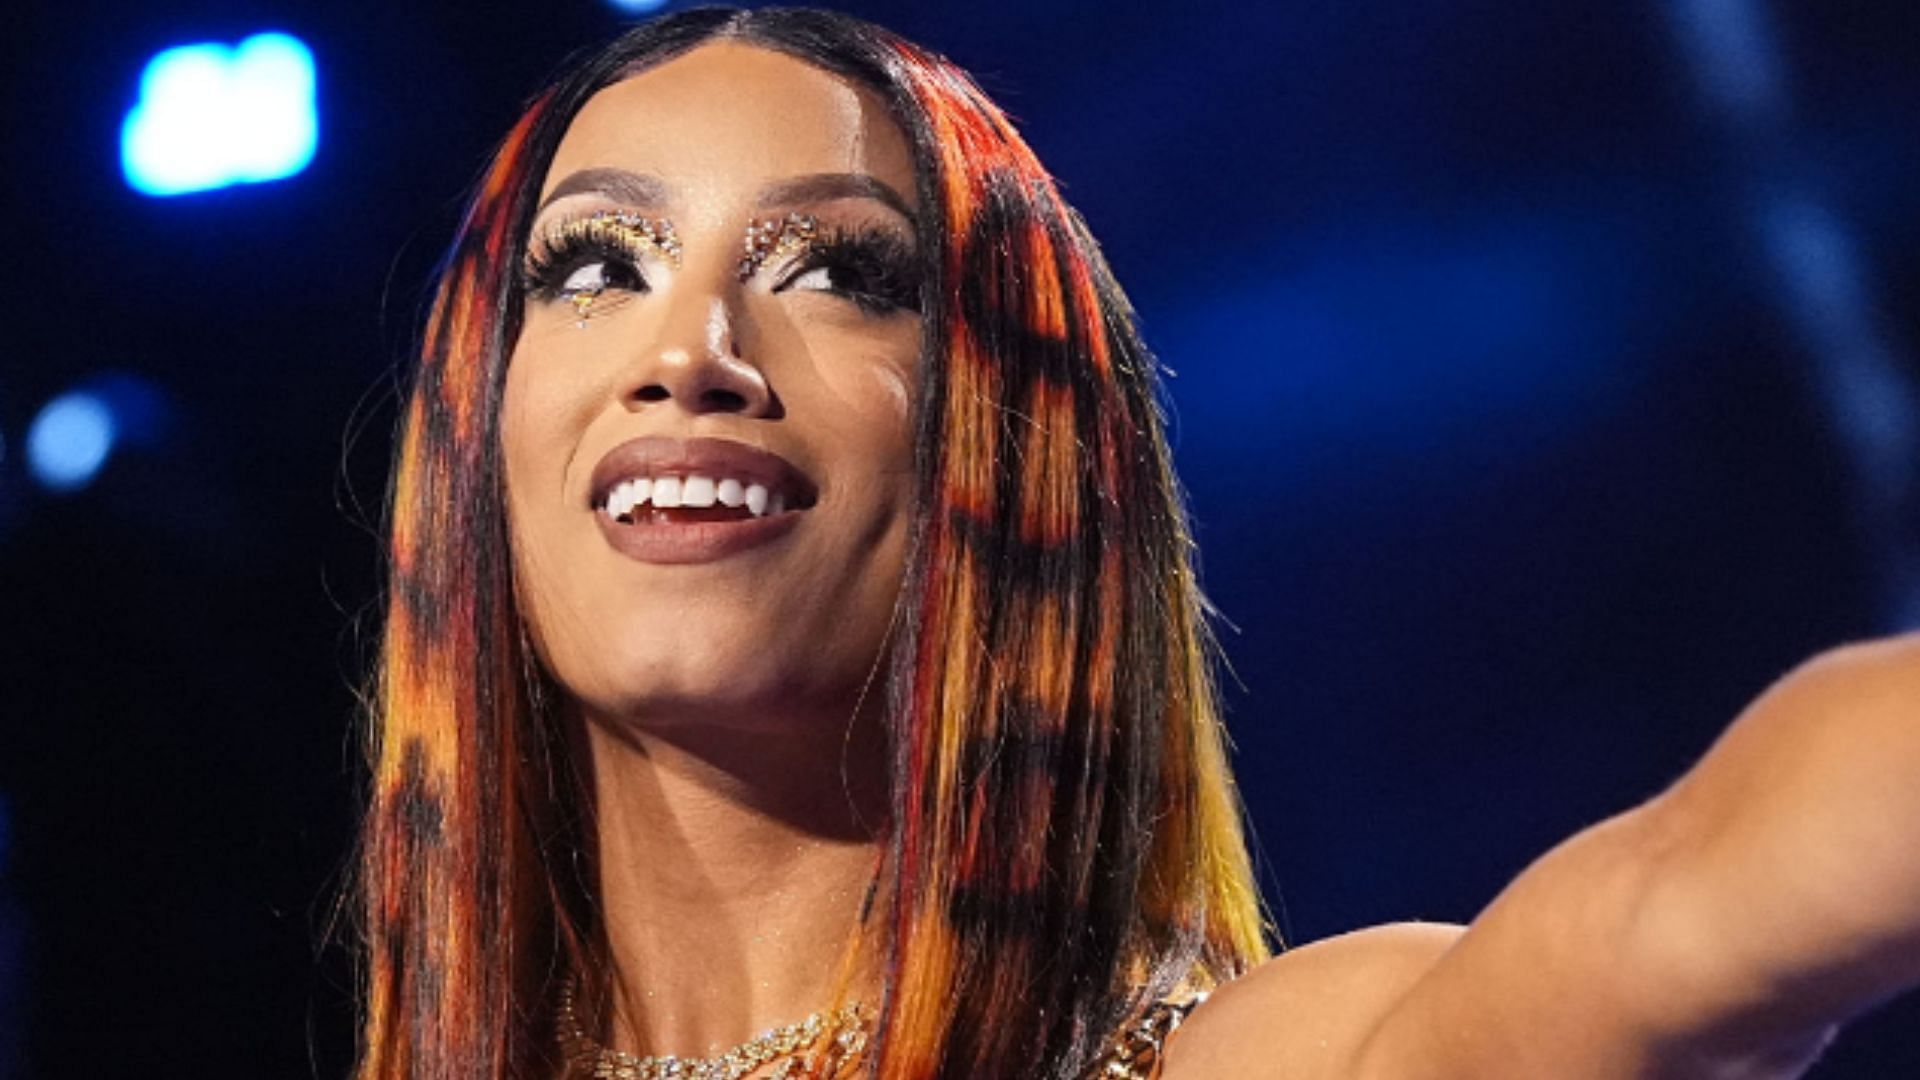 Mercedes Mone is officially All Elite [Image Credits: AEW